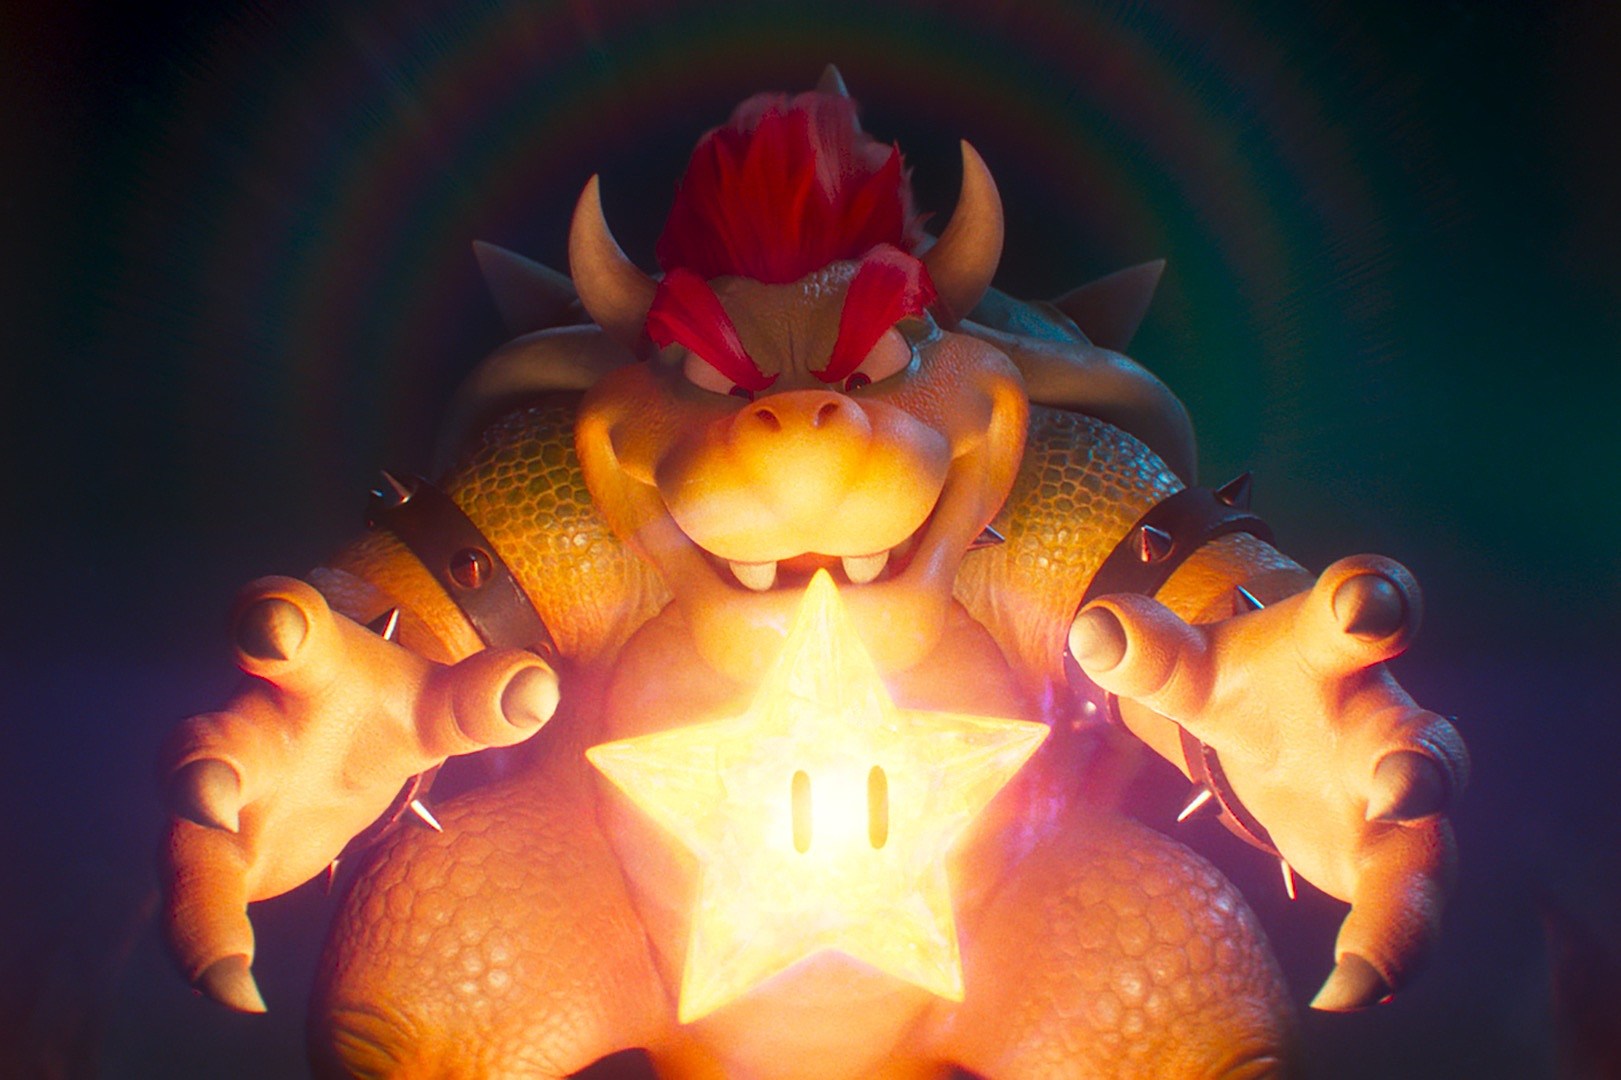 Facts About 1993's Super Mario Bros. Movie Even King Koopa Can't Handle